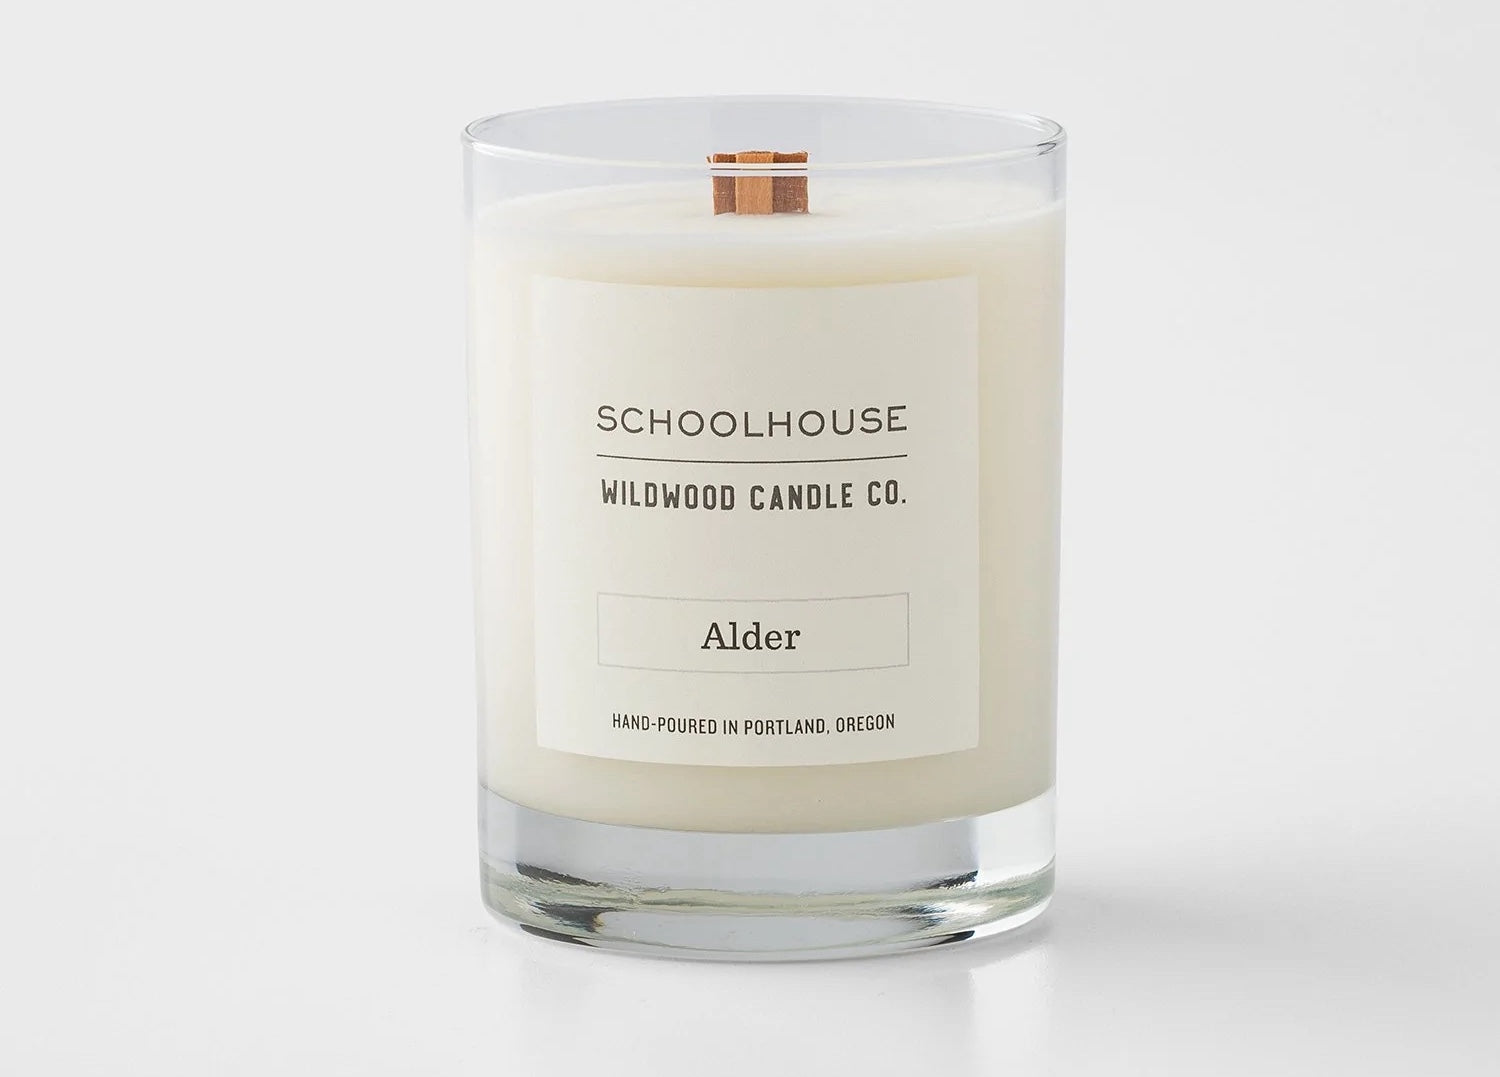 A white candle in a glass jar with a simple white label and wooden wick